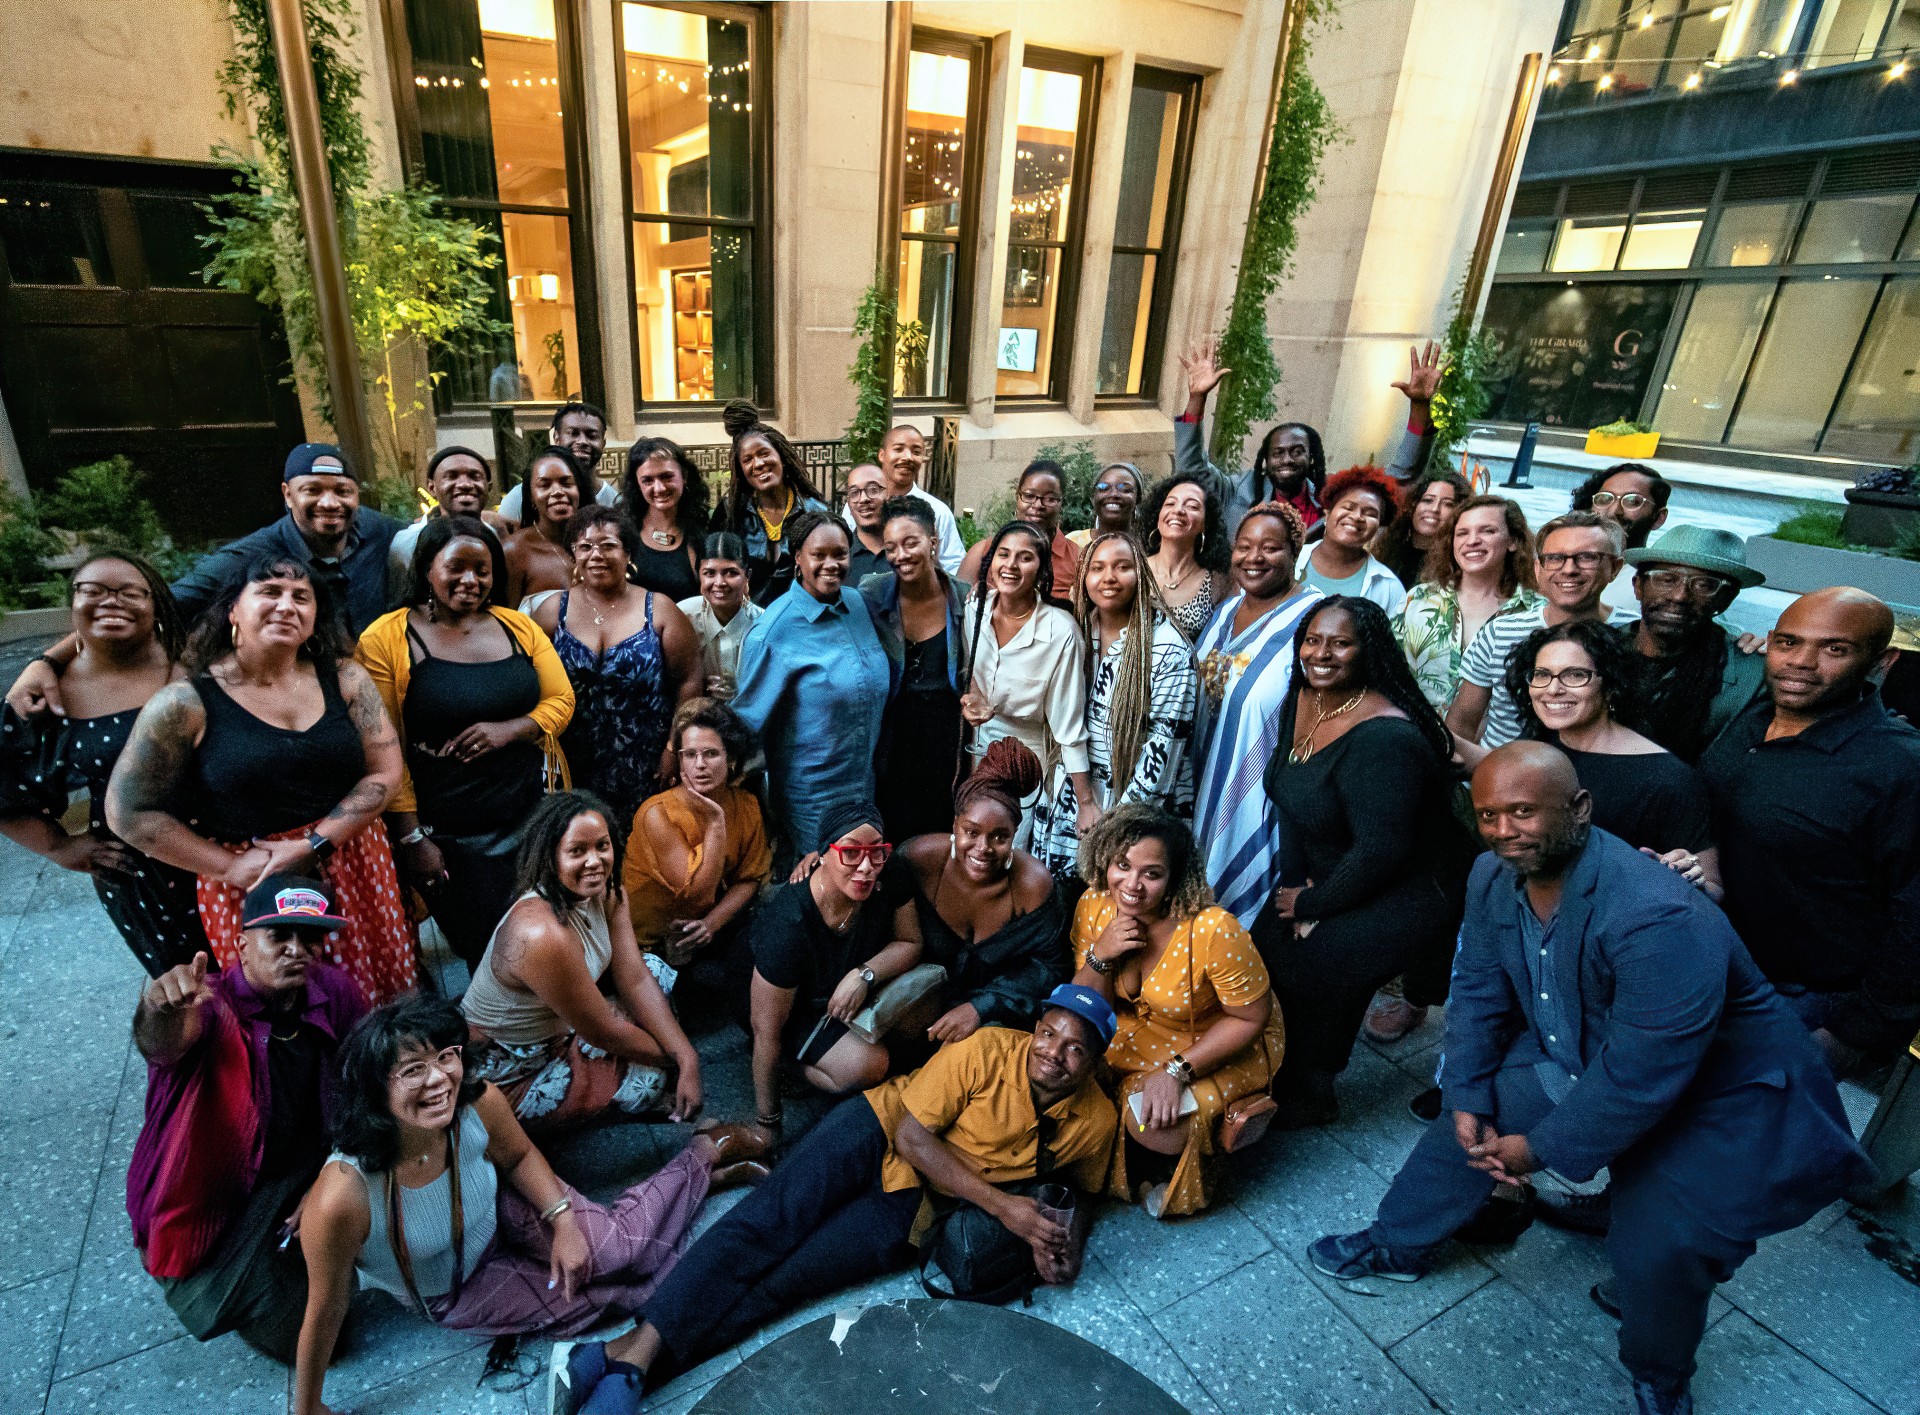 A group photo of festival staff, year-round staff, and board taken at the conclusion of the 2021 BlackStar Film Festival. It shows the group huddle together and posing for the camera, which is slightly above the crowd. Most people are smiling widely and there are a number of bright colors worn. It is taken outside in the early evening.